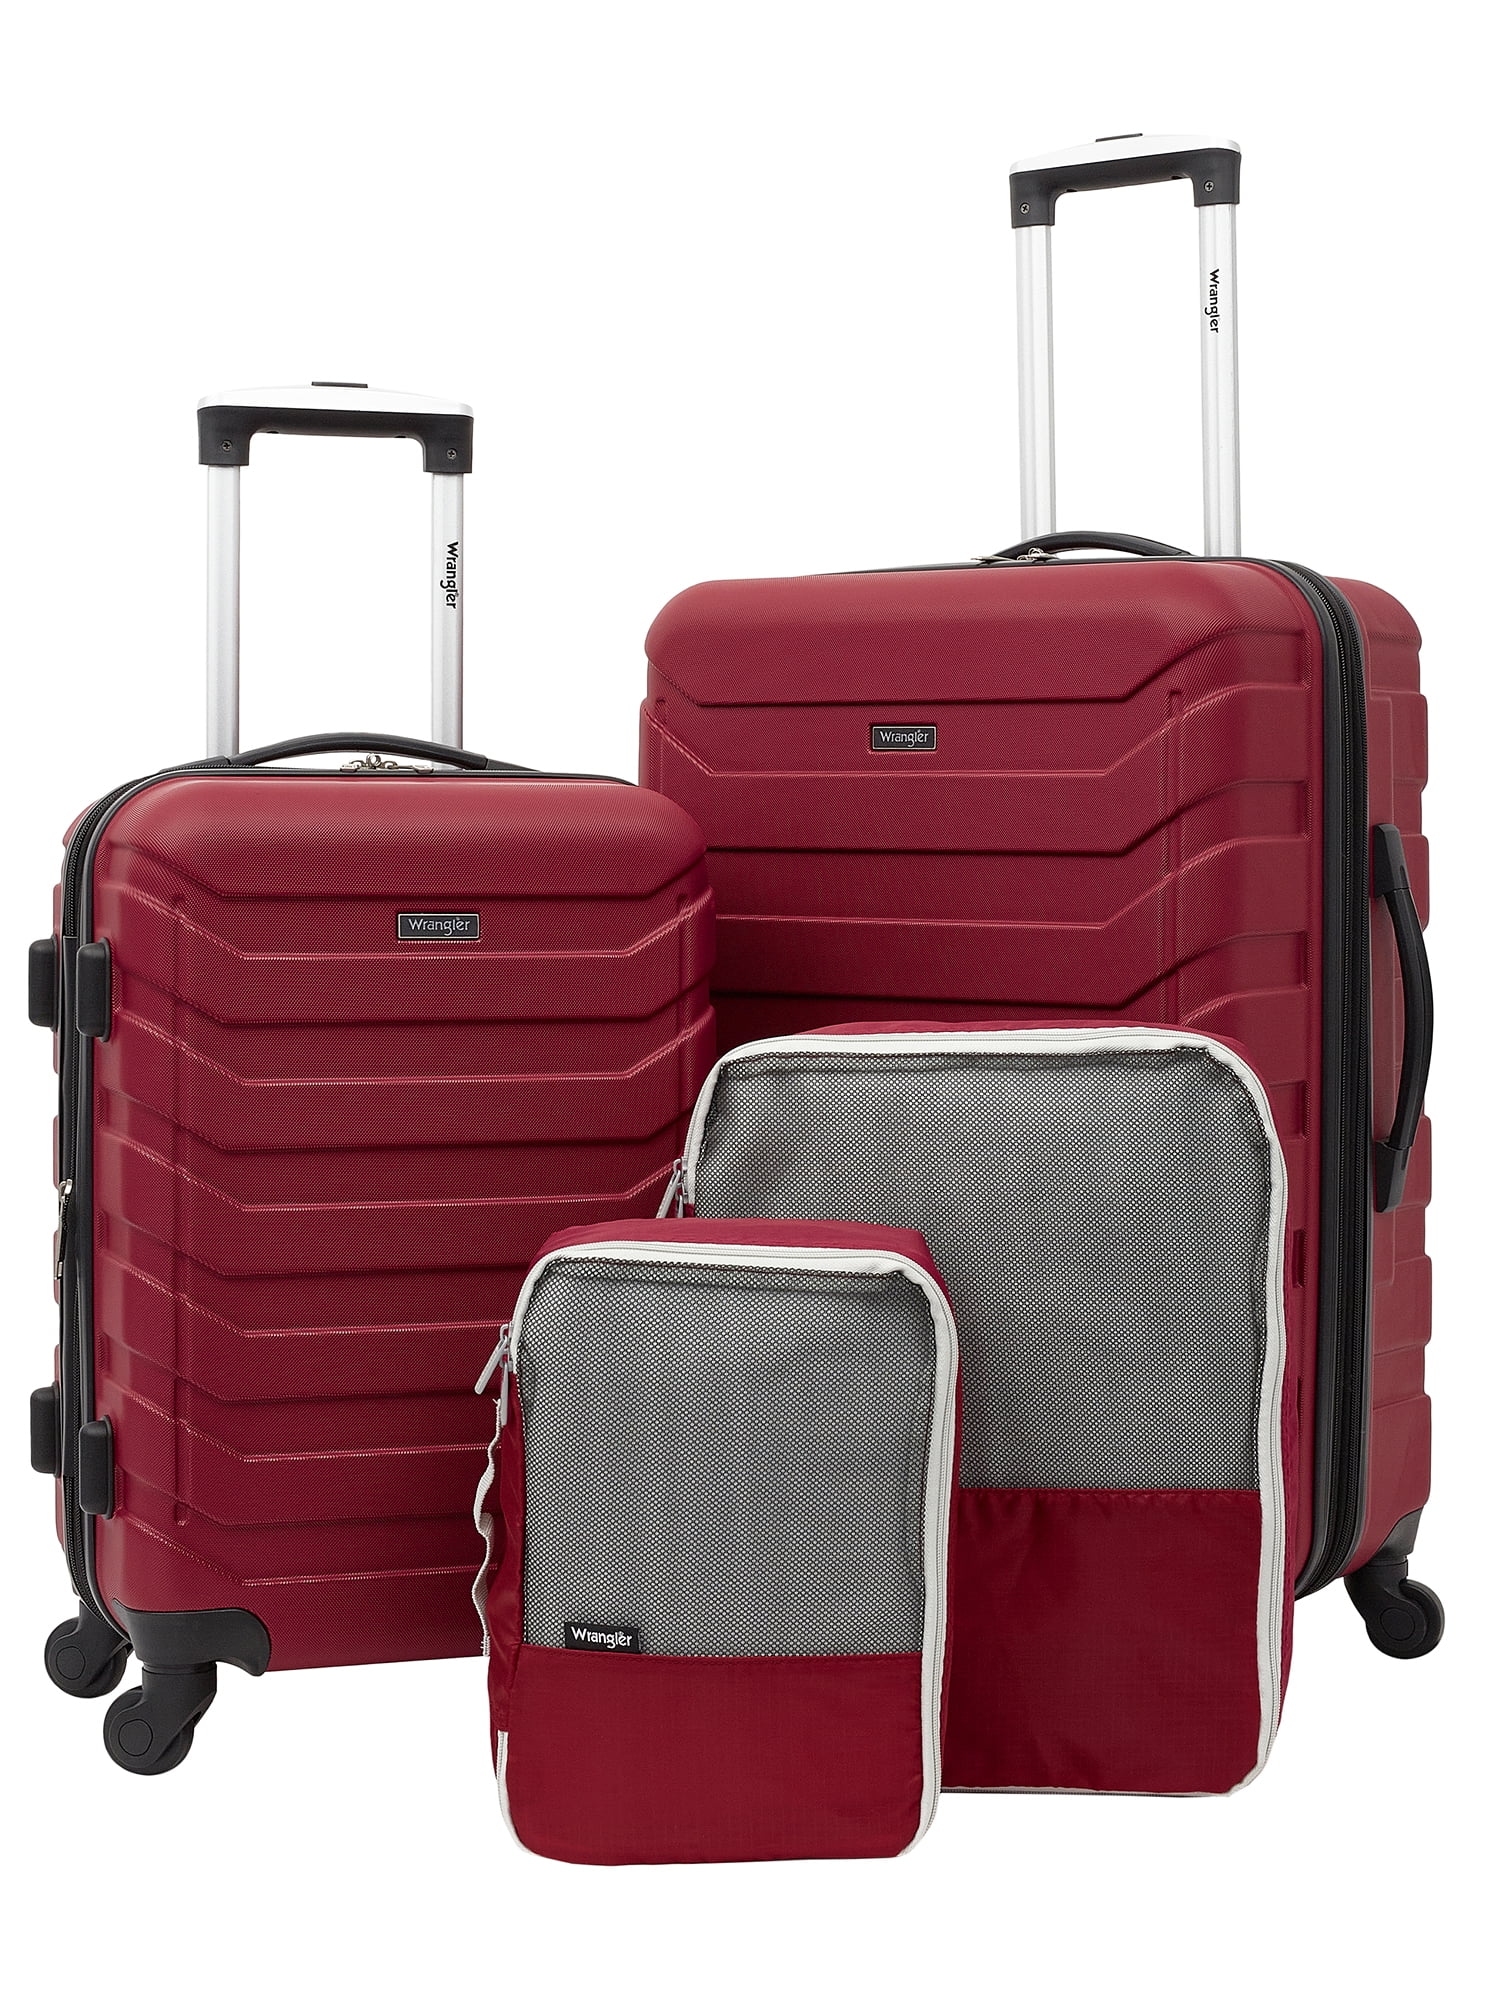 4-Piece Wrangler Rolling Hardside Luggage Set (Red) $81.60 + Free Shipping w/ Walmart+ or on $35+